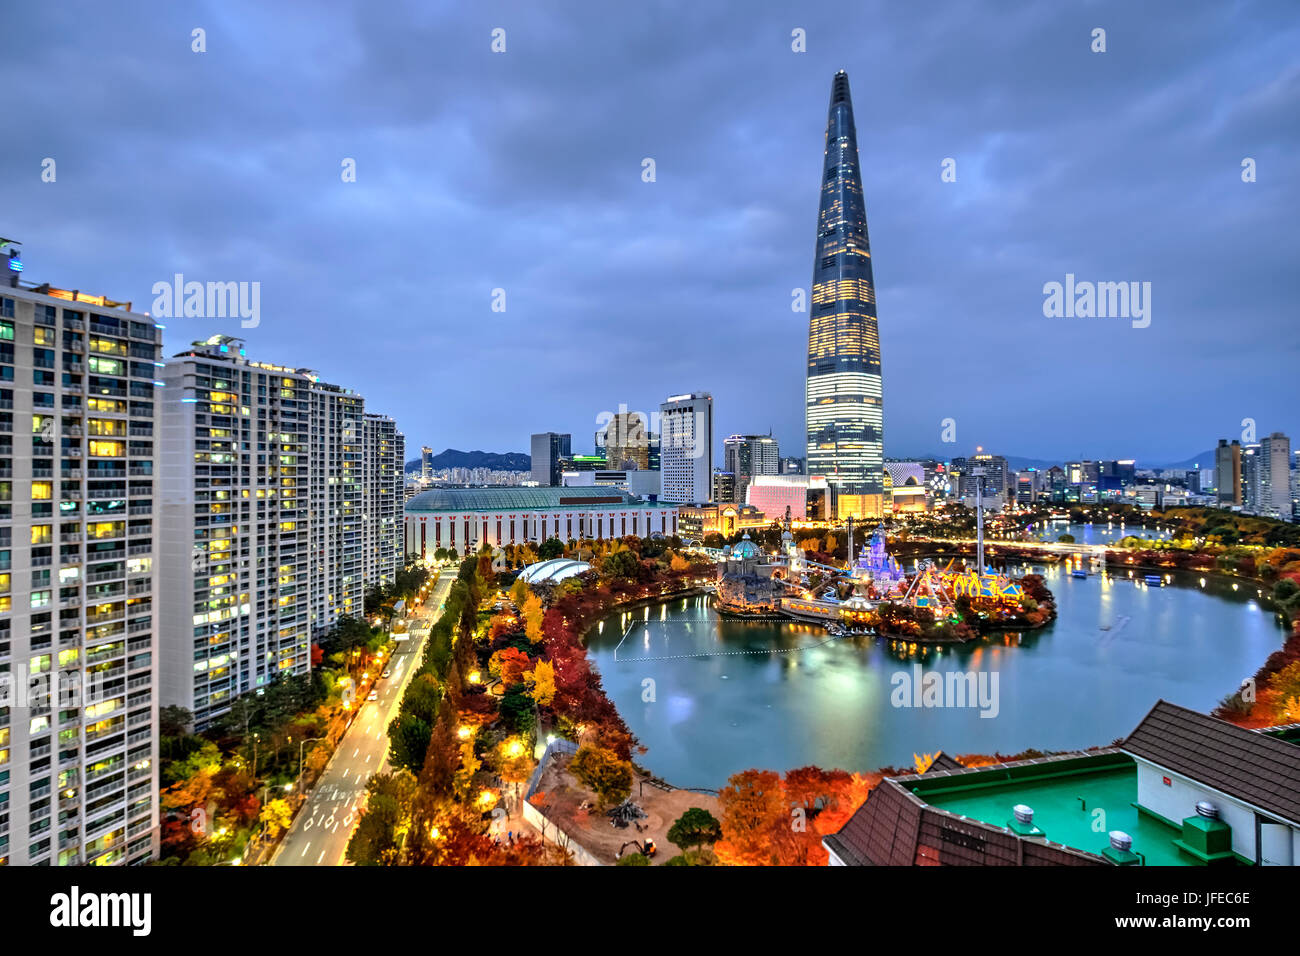 The tallest building in Seoul, South Korea at the blue hour. Stock Photo